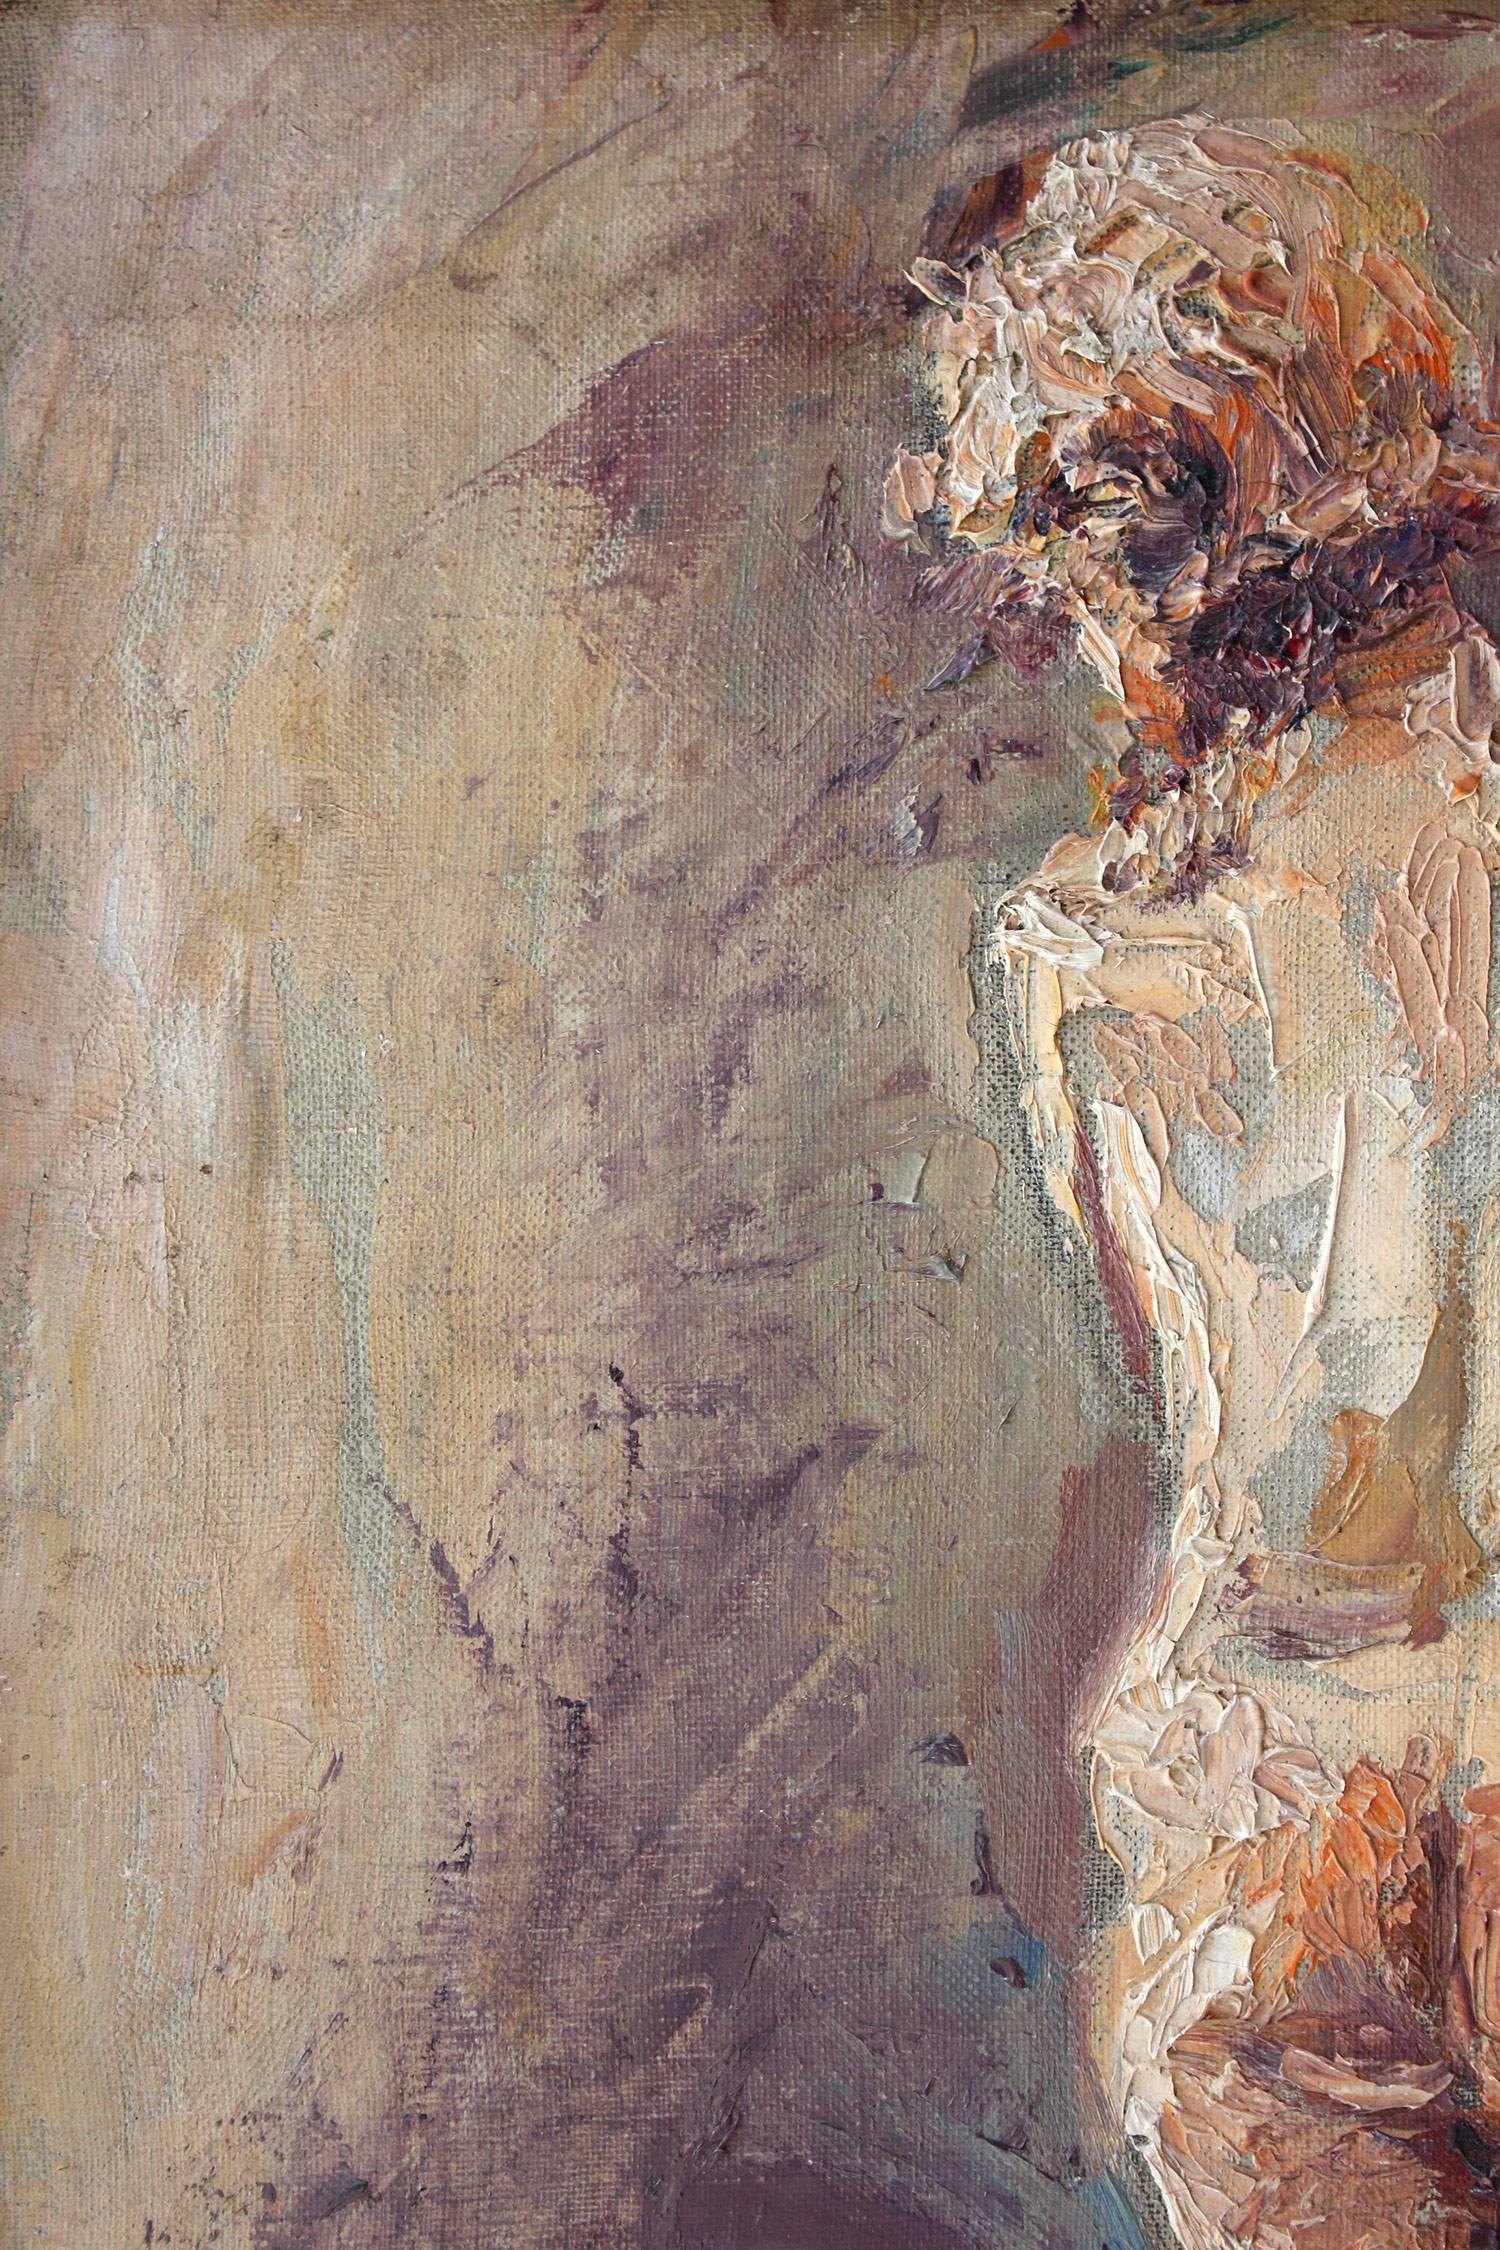 Figurative Nude Woman - Impressionist Painting by Coulton Waugh